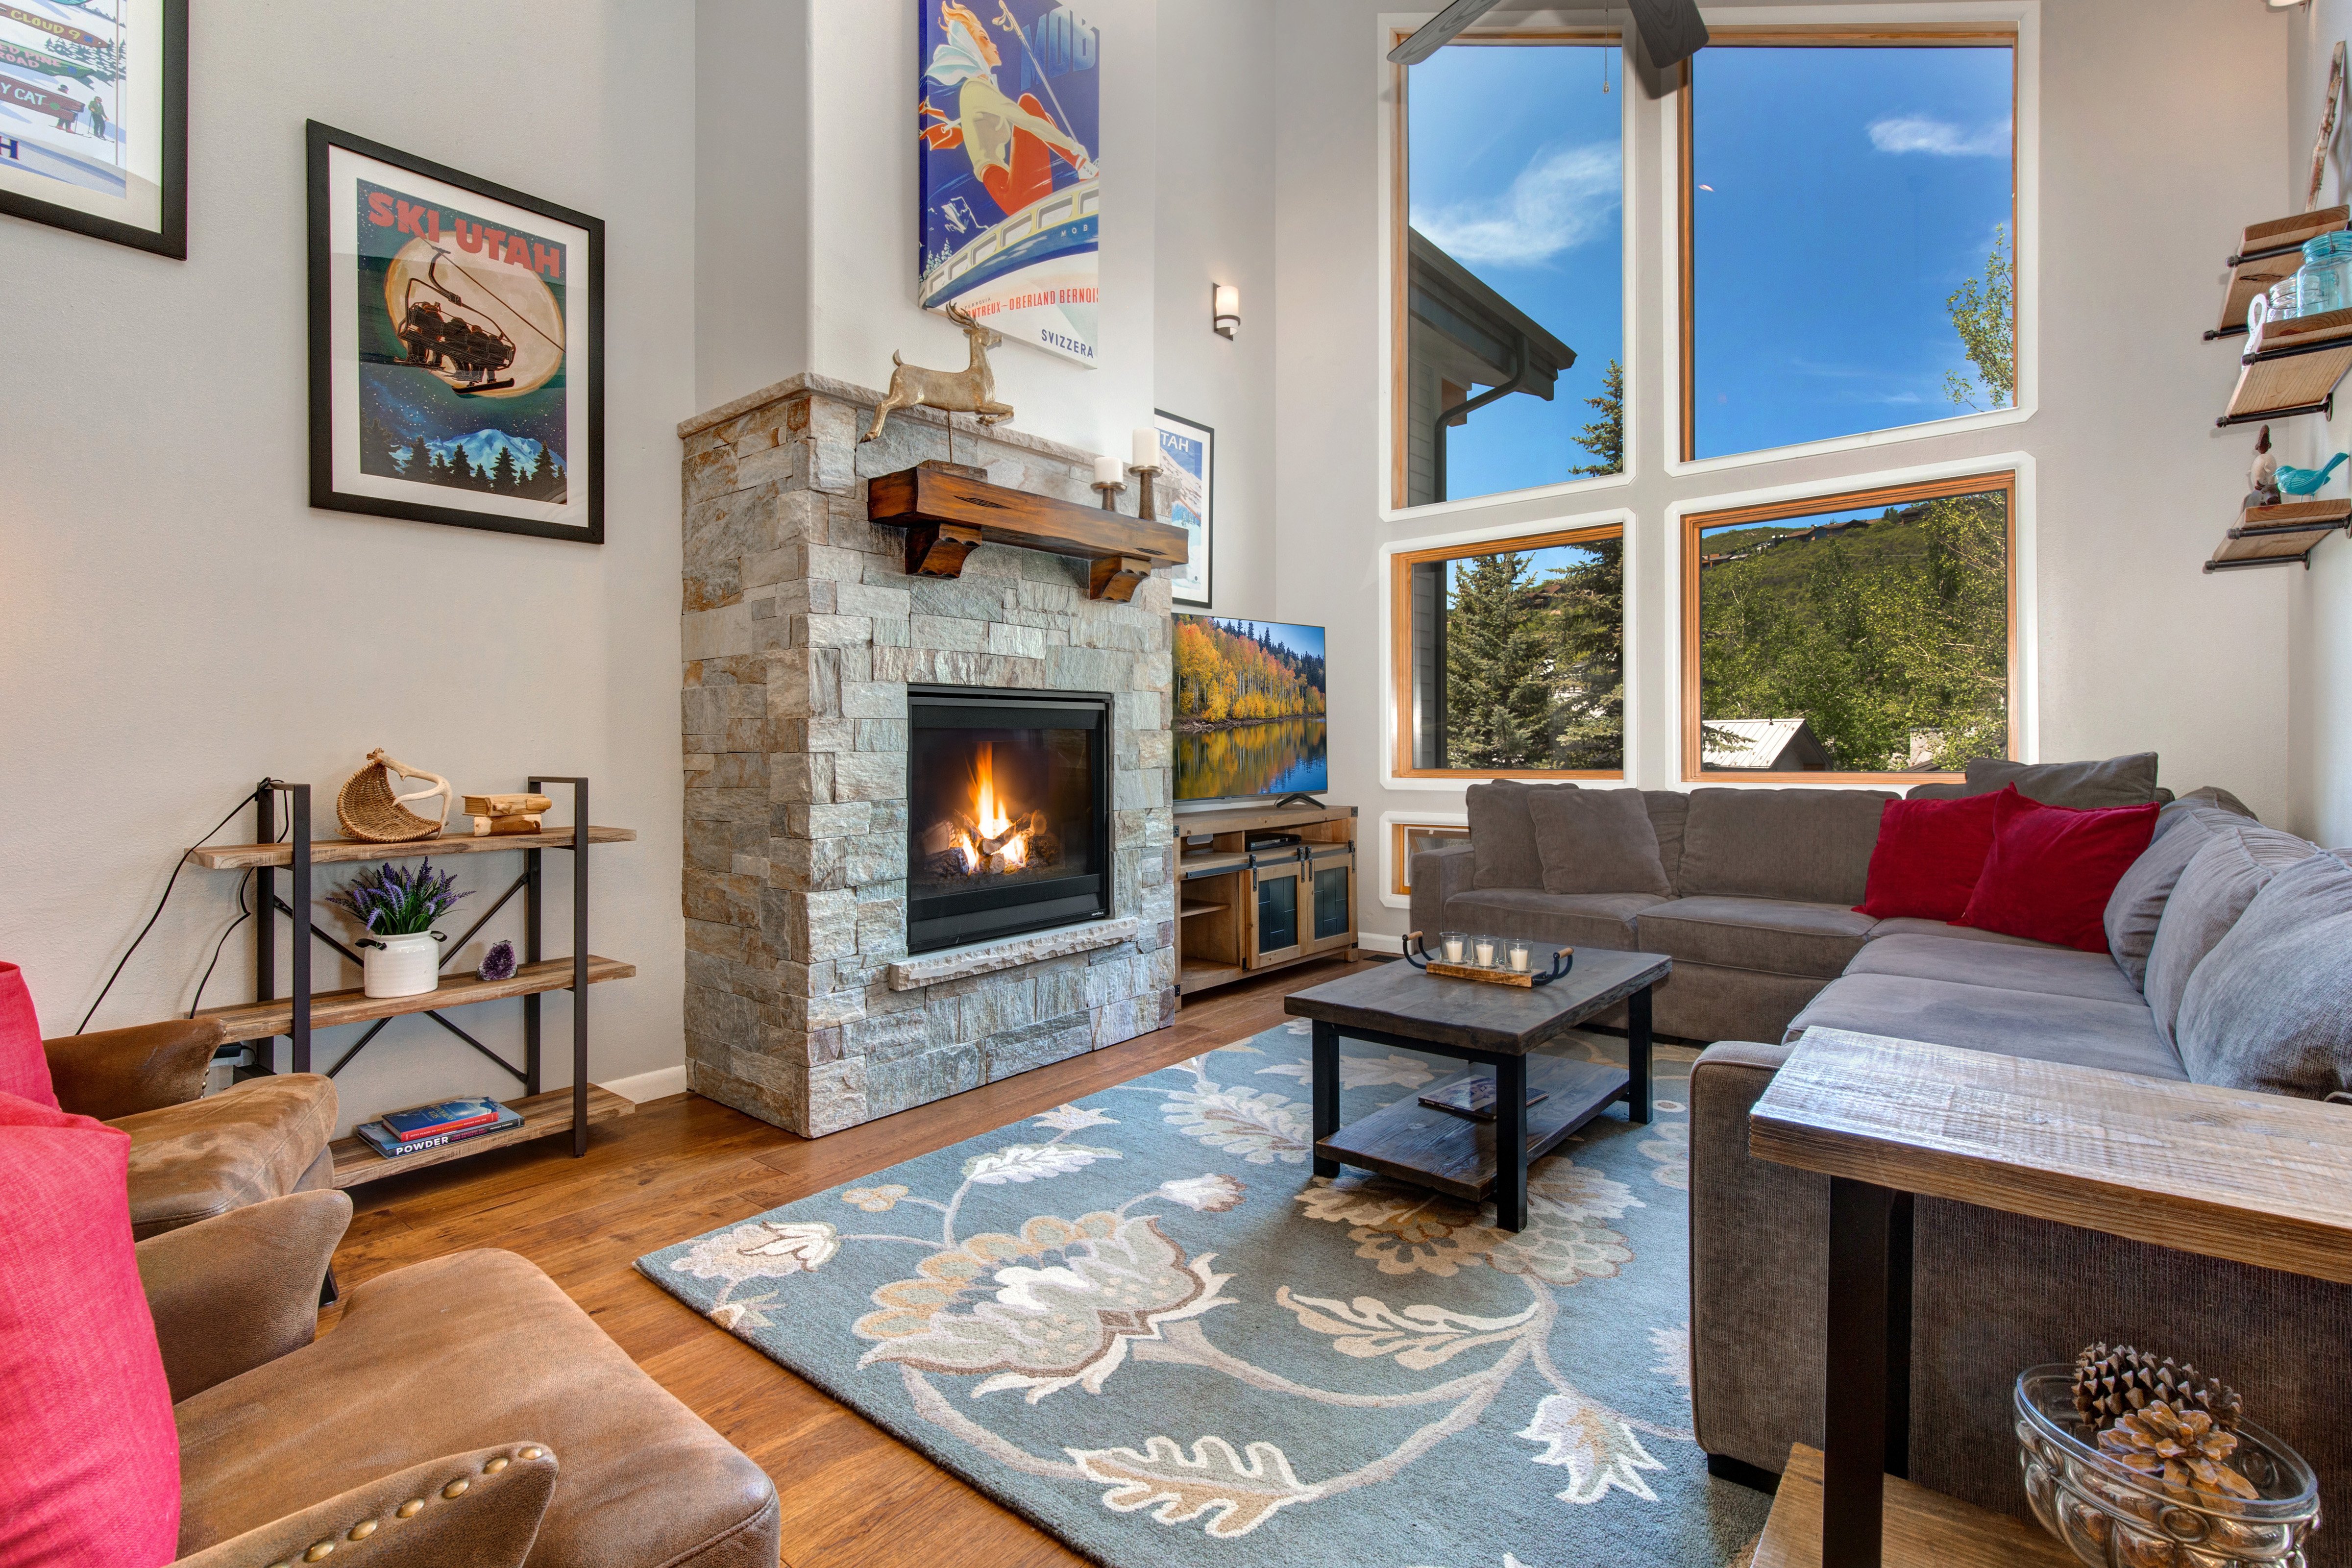 Central Location to Year-Round Recreation & Private Hot tub! Deer Valley Boulder Creek 1106